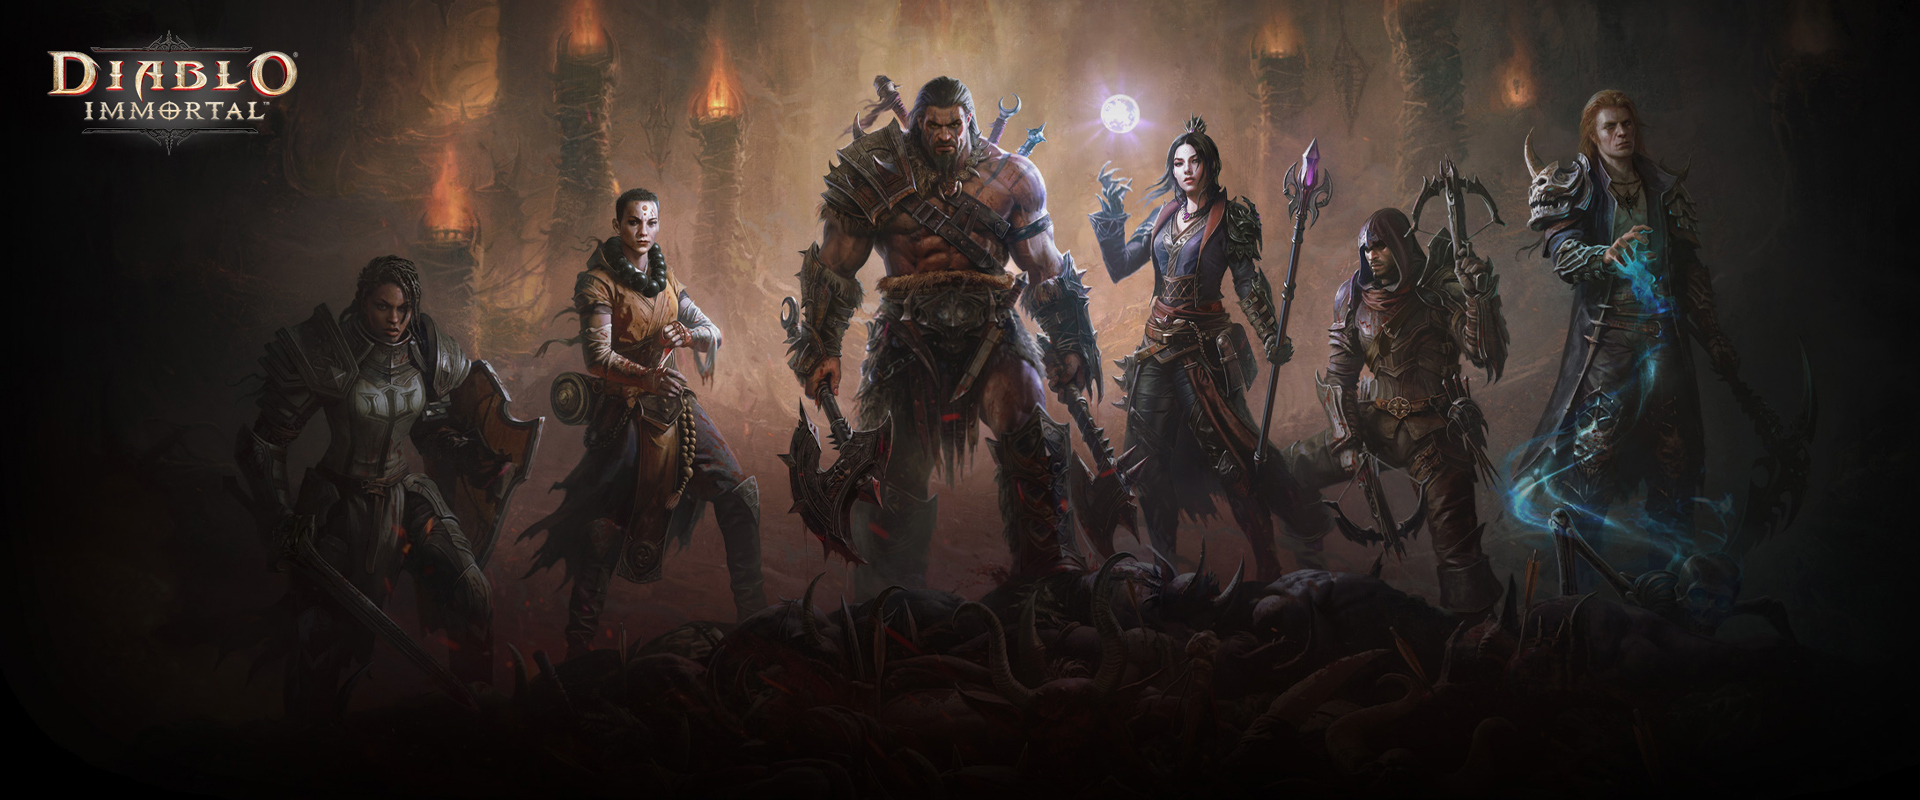 Download & Play Diablo Immortal on PC & Mac with NoxPlayer (Emulator)